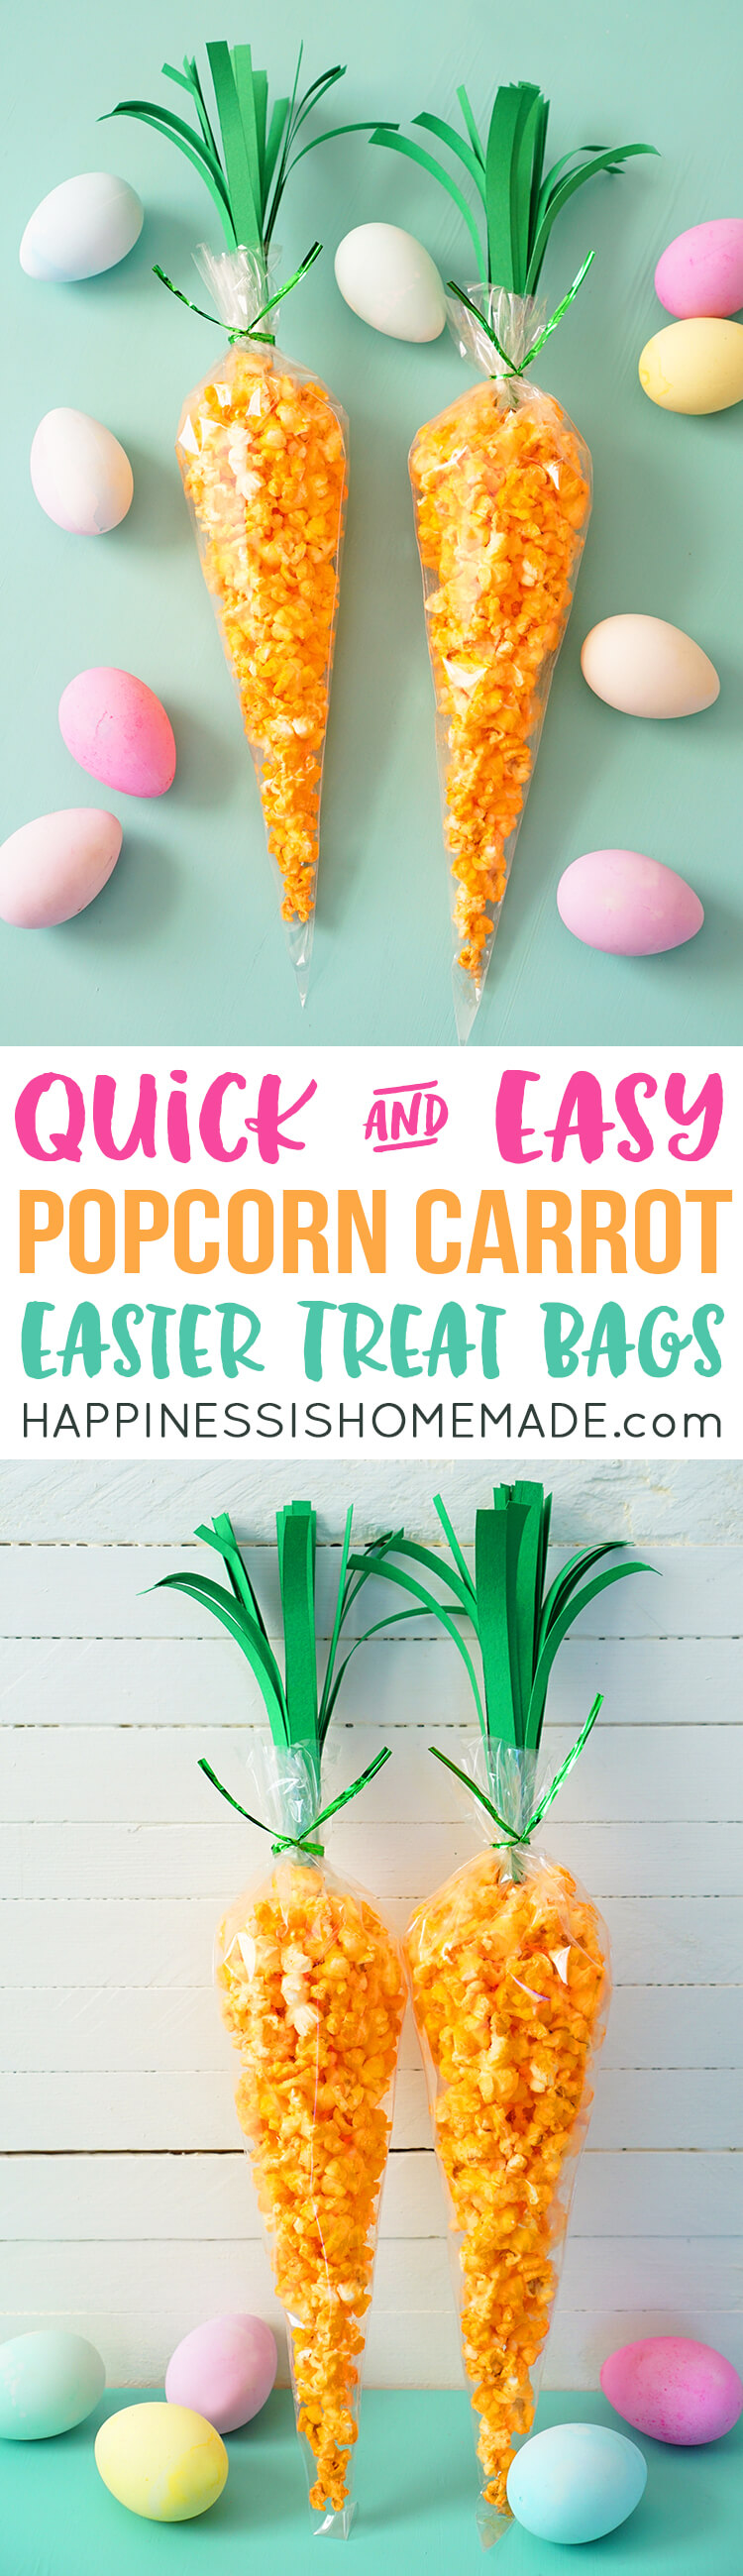 Carrot Treat Bags - Organize and Decorate Everything